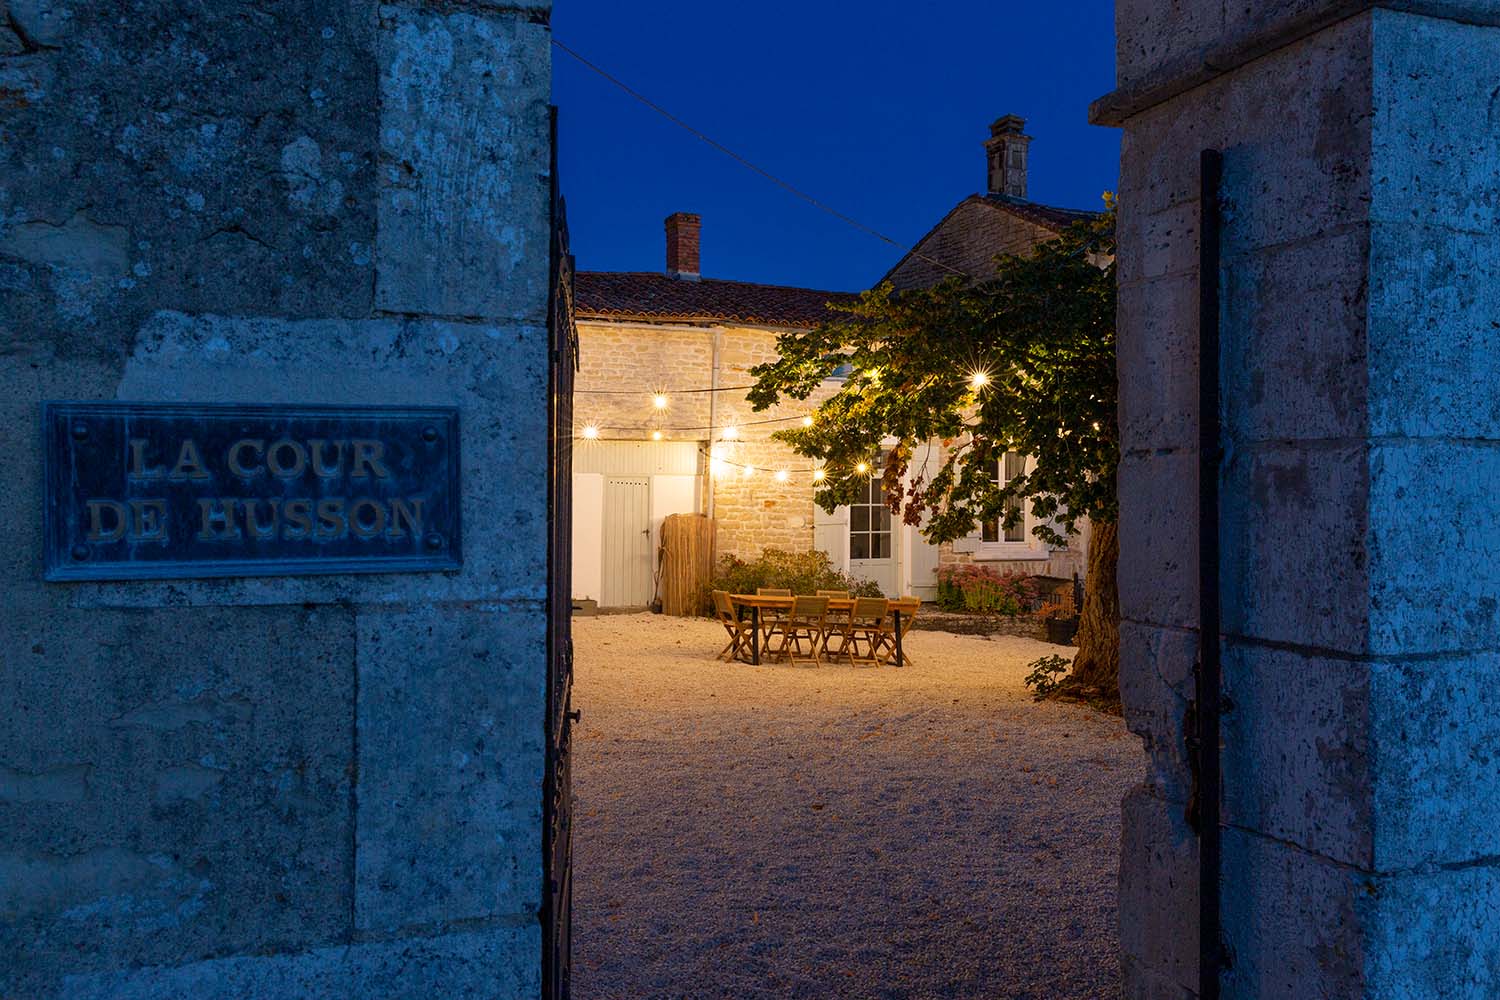 Dusk in the peaceful courtyard of La Cour de Husson